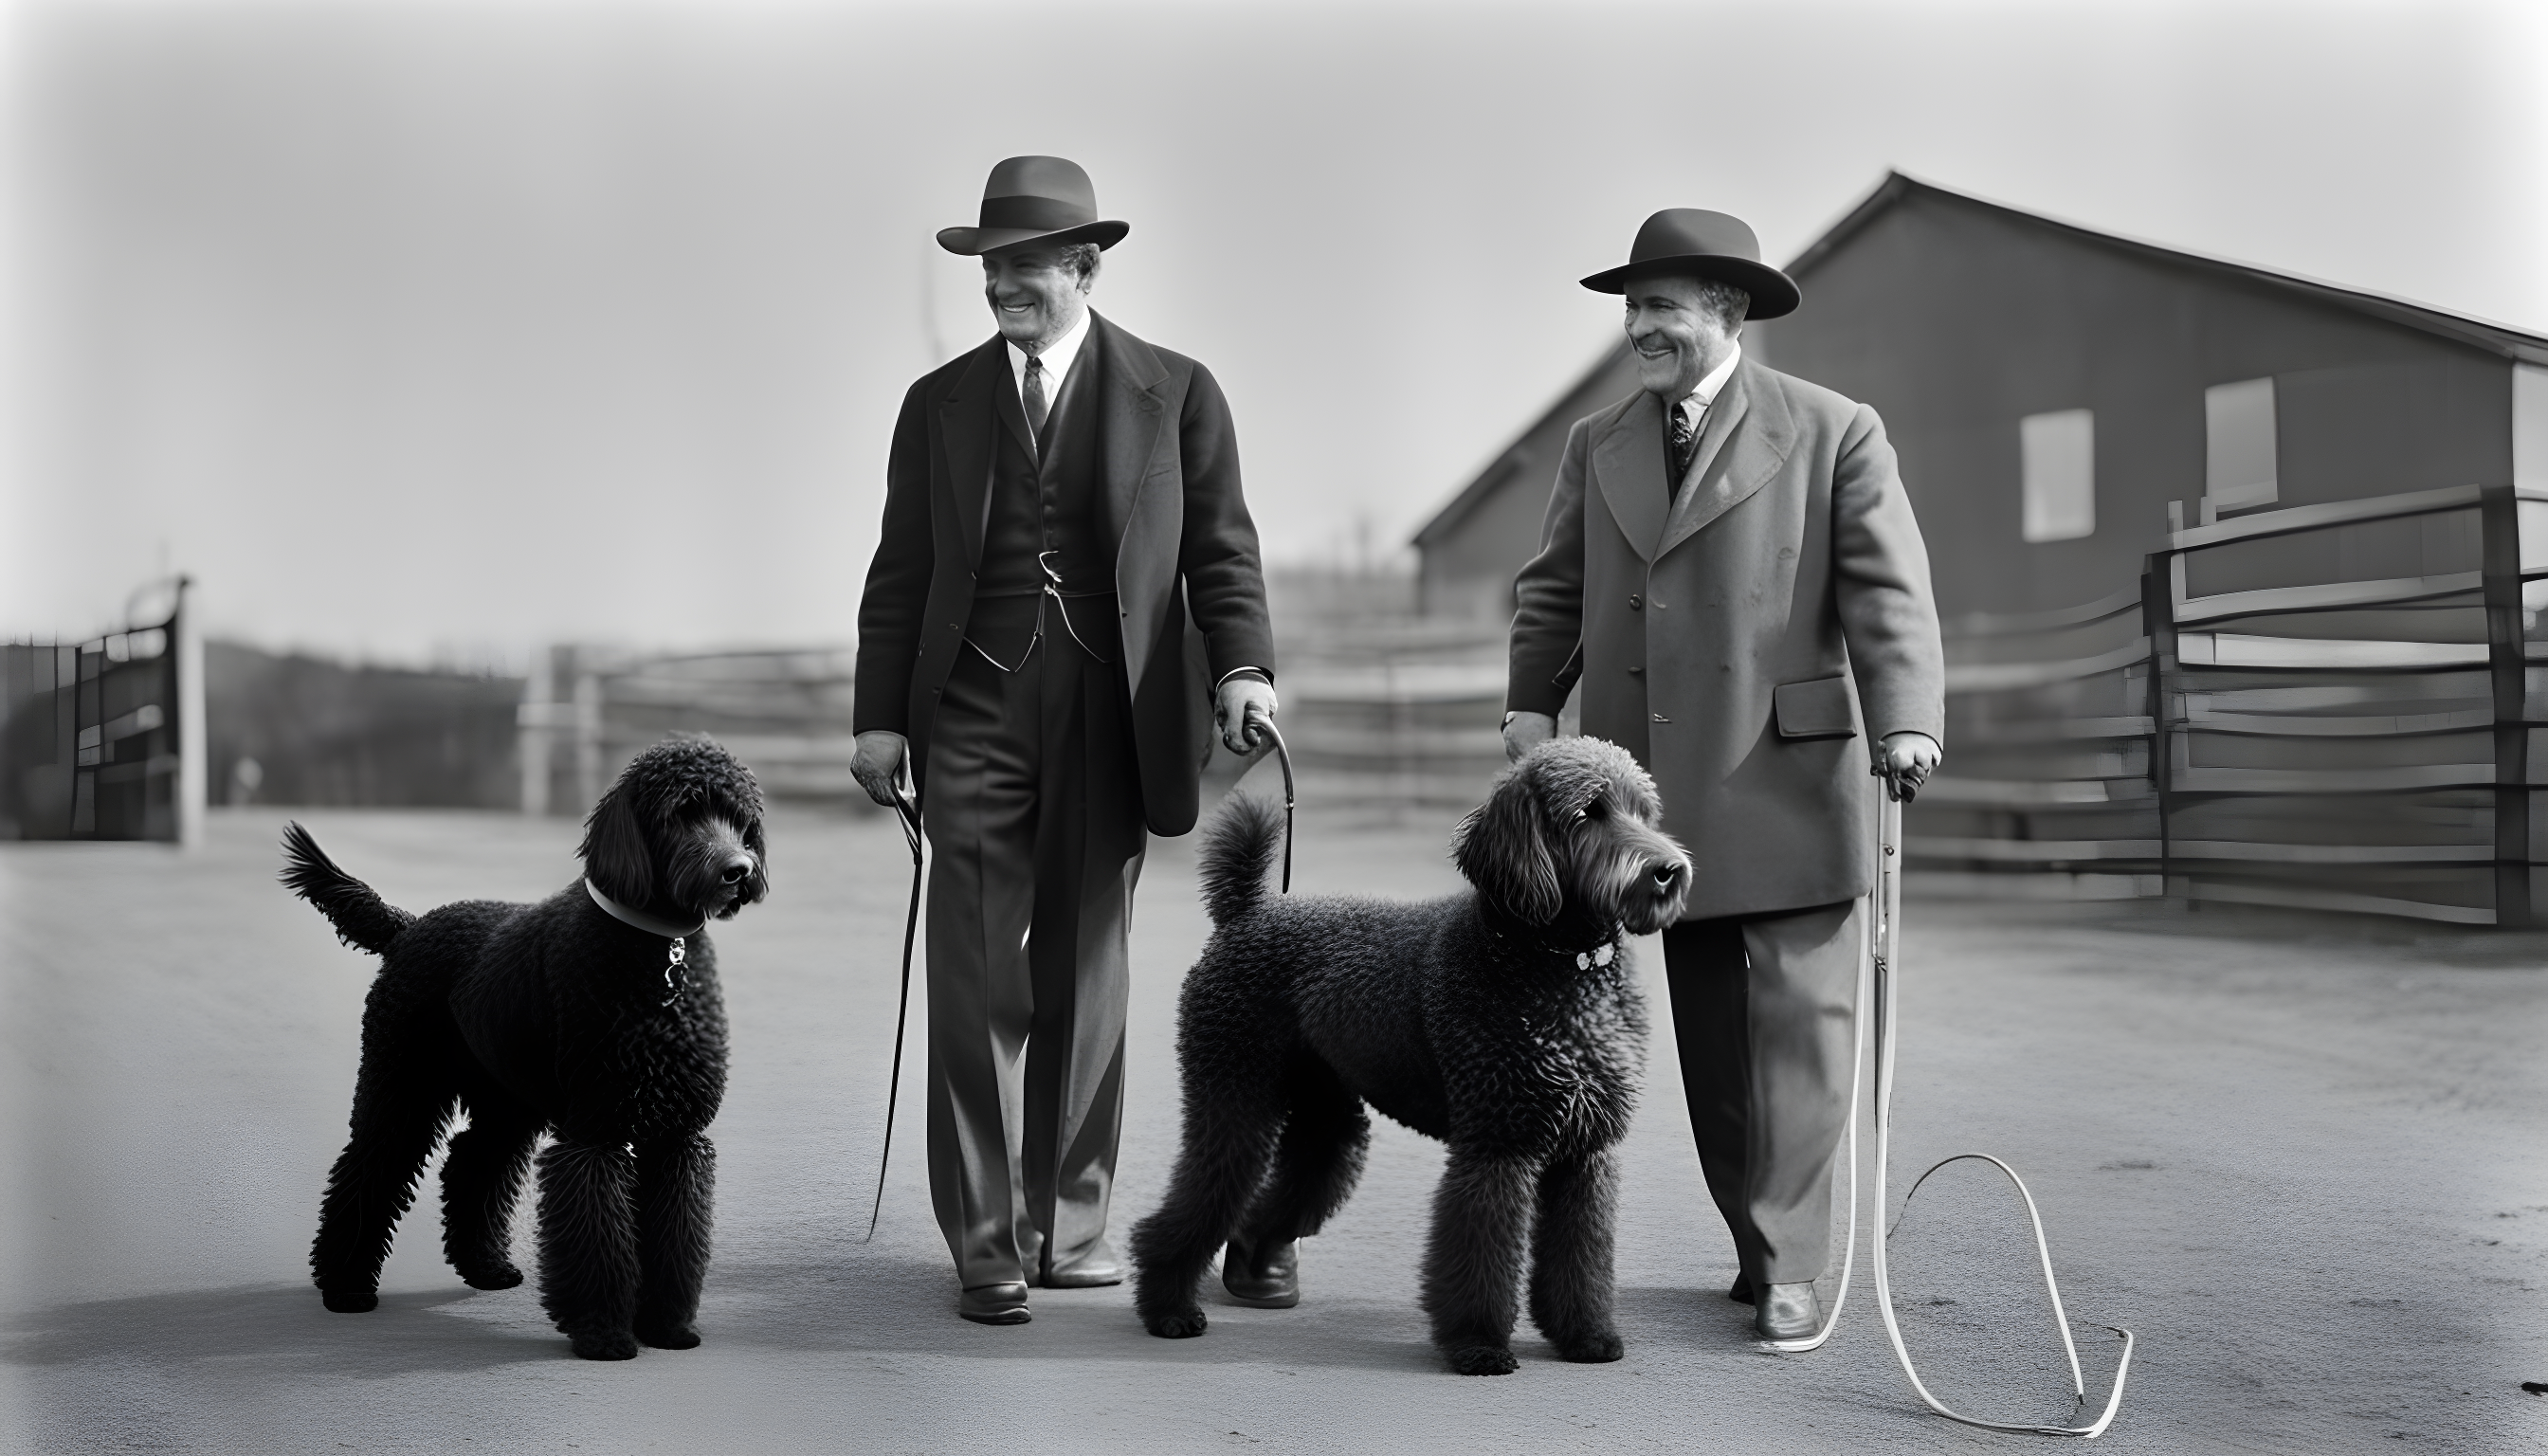 A black and white photo showcasing the first-ever Labradoodle alongside its breeder